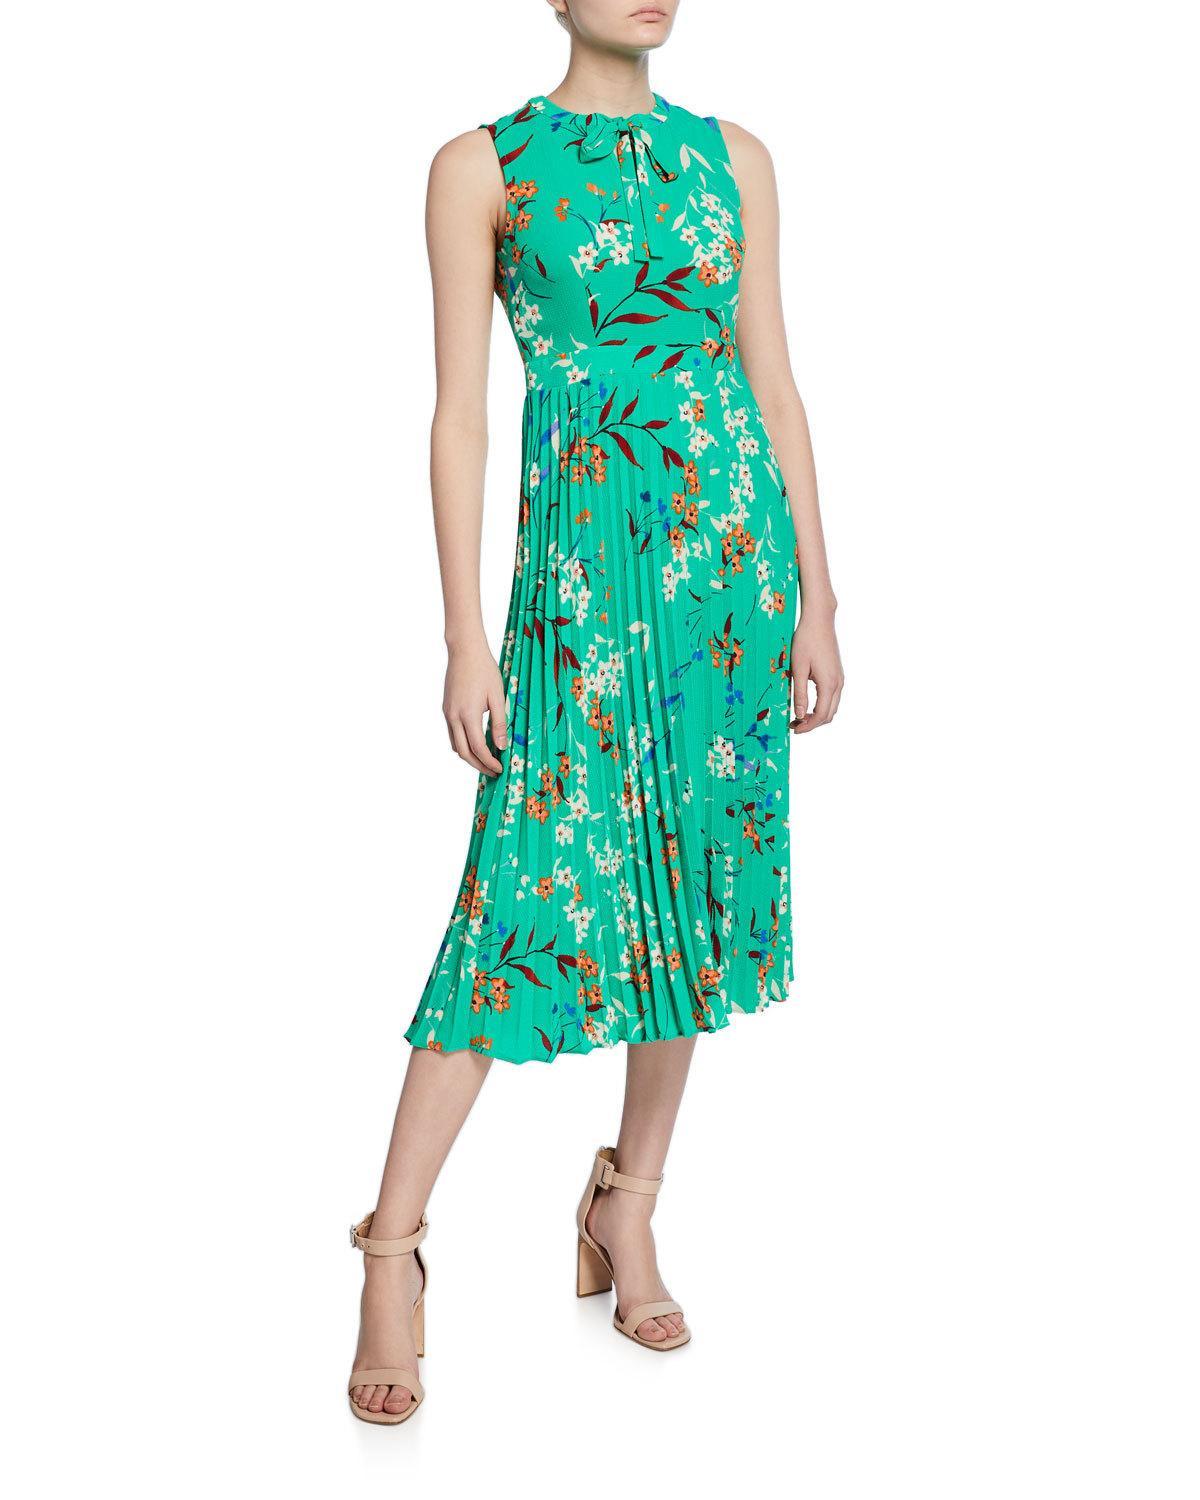 Lyst - Donna Morgan Pleated Floral Tie-neck Midi Dress in Green